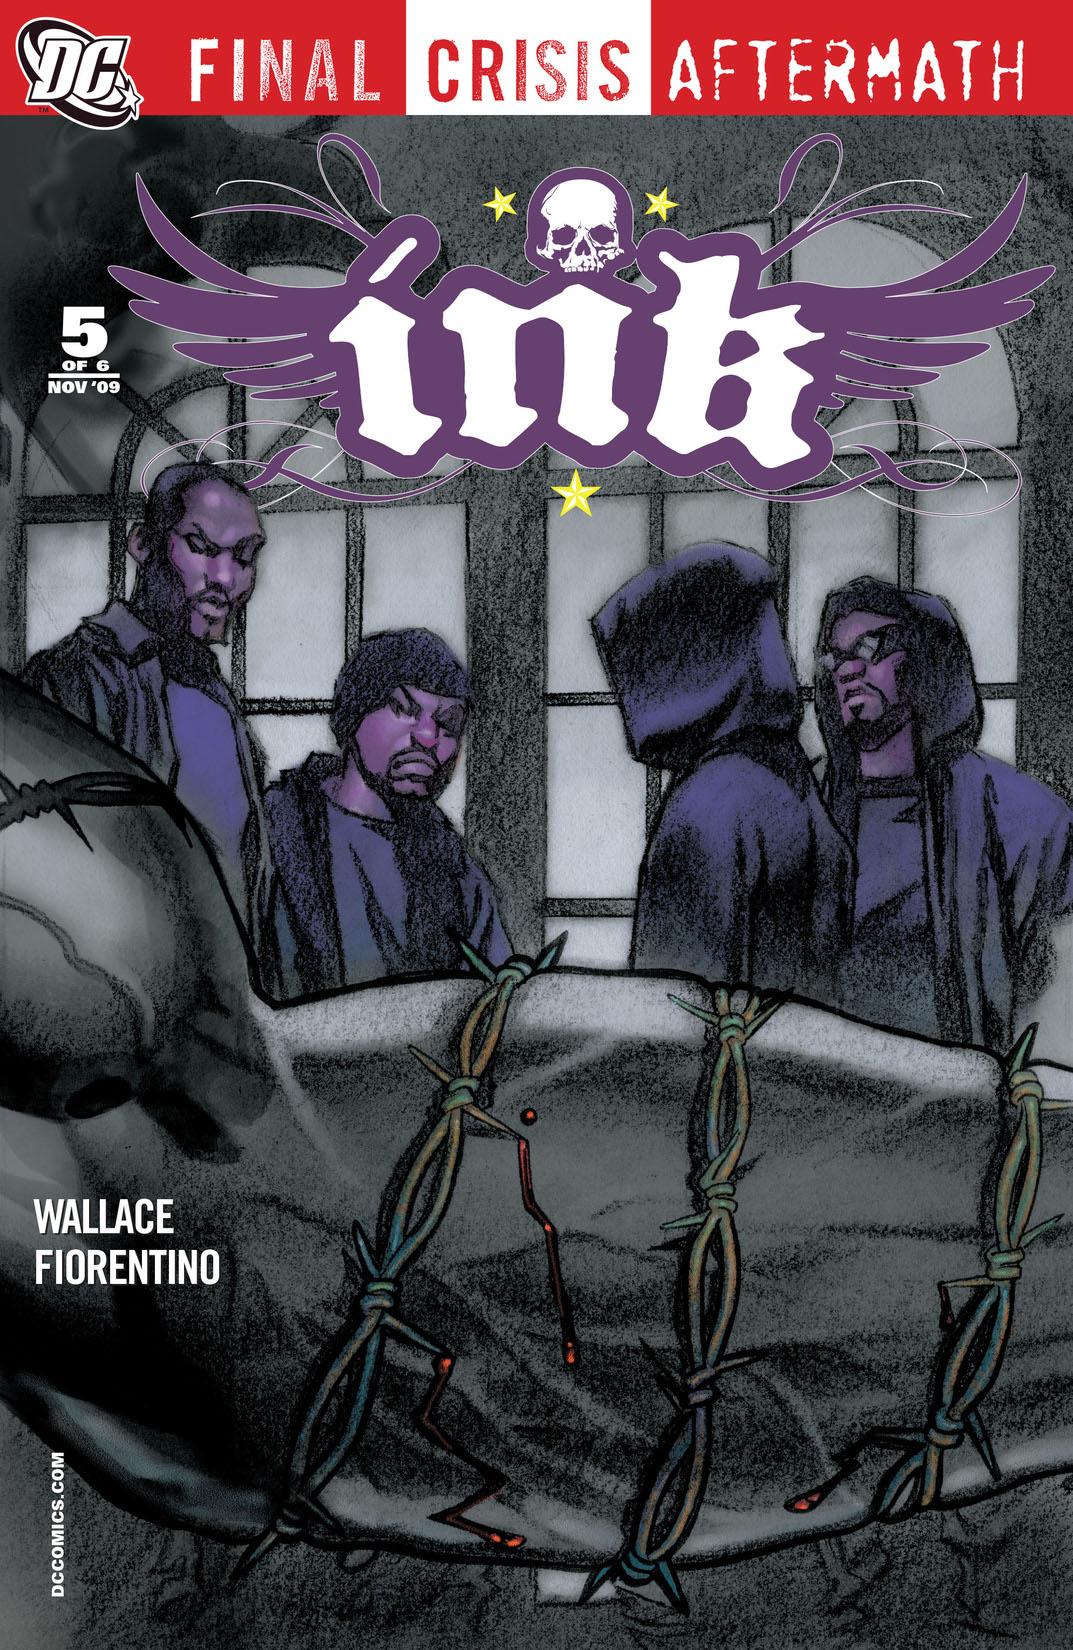 Final Crisis Aftermath: Ink #5 preview images